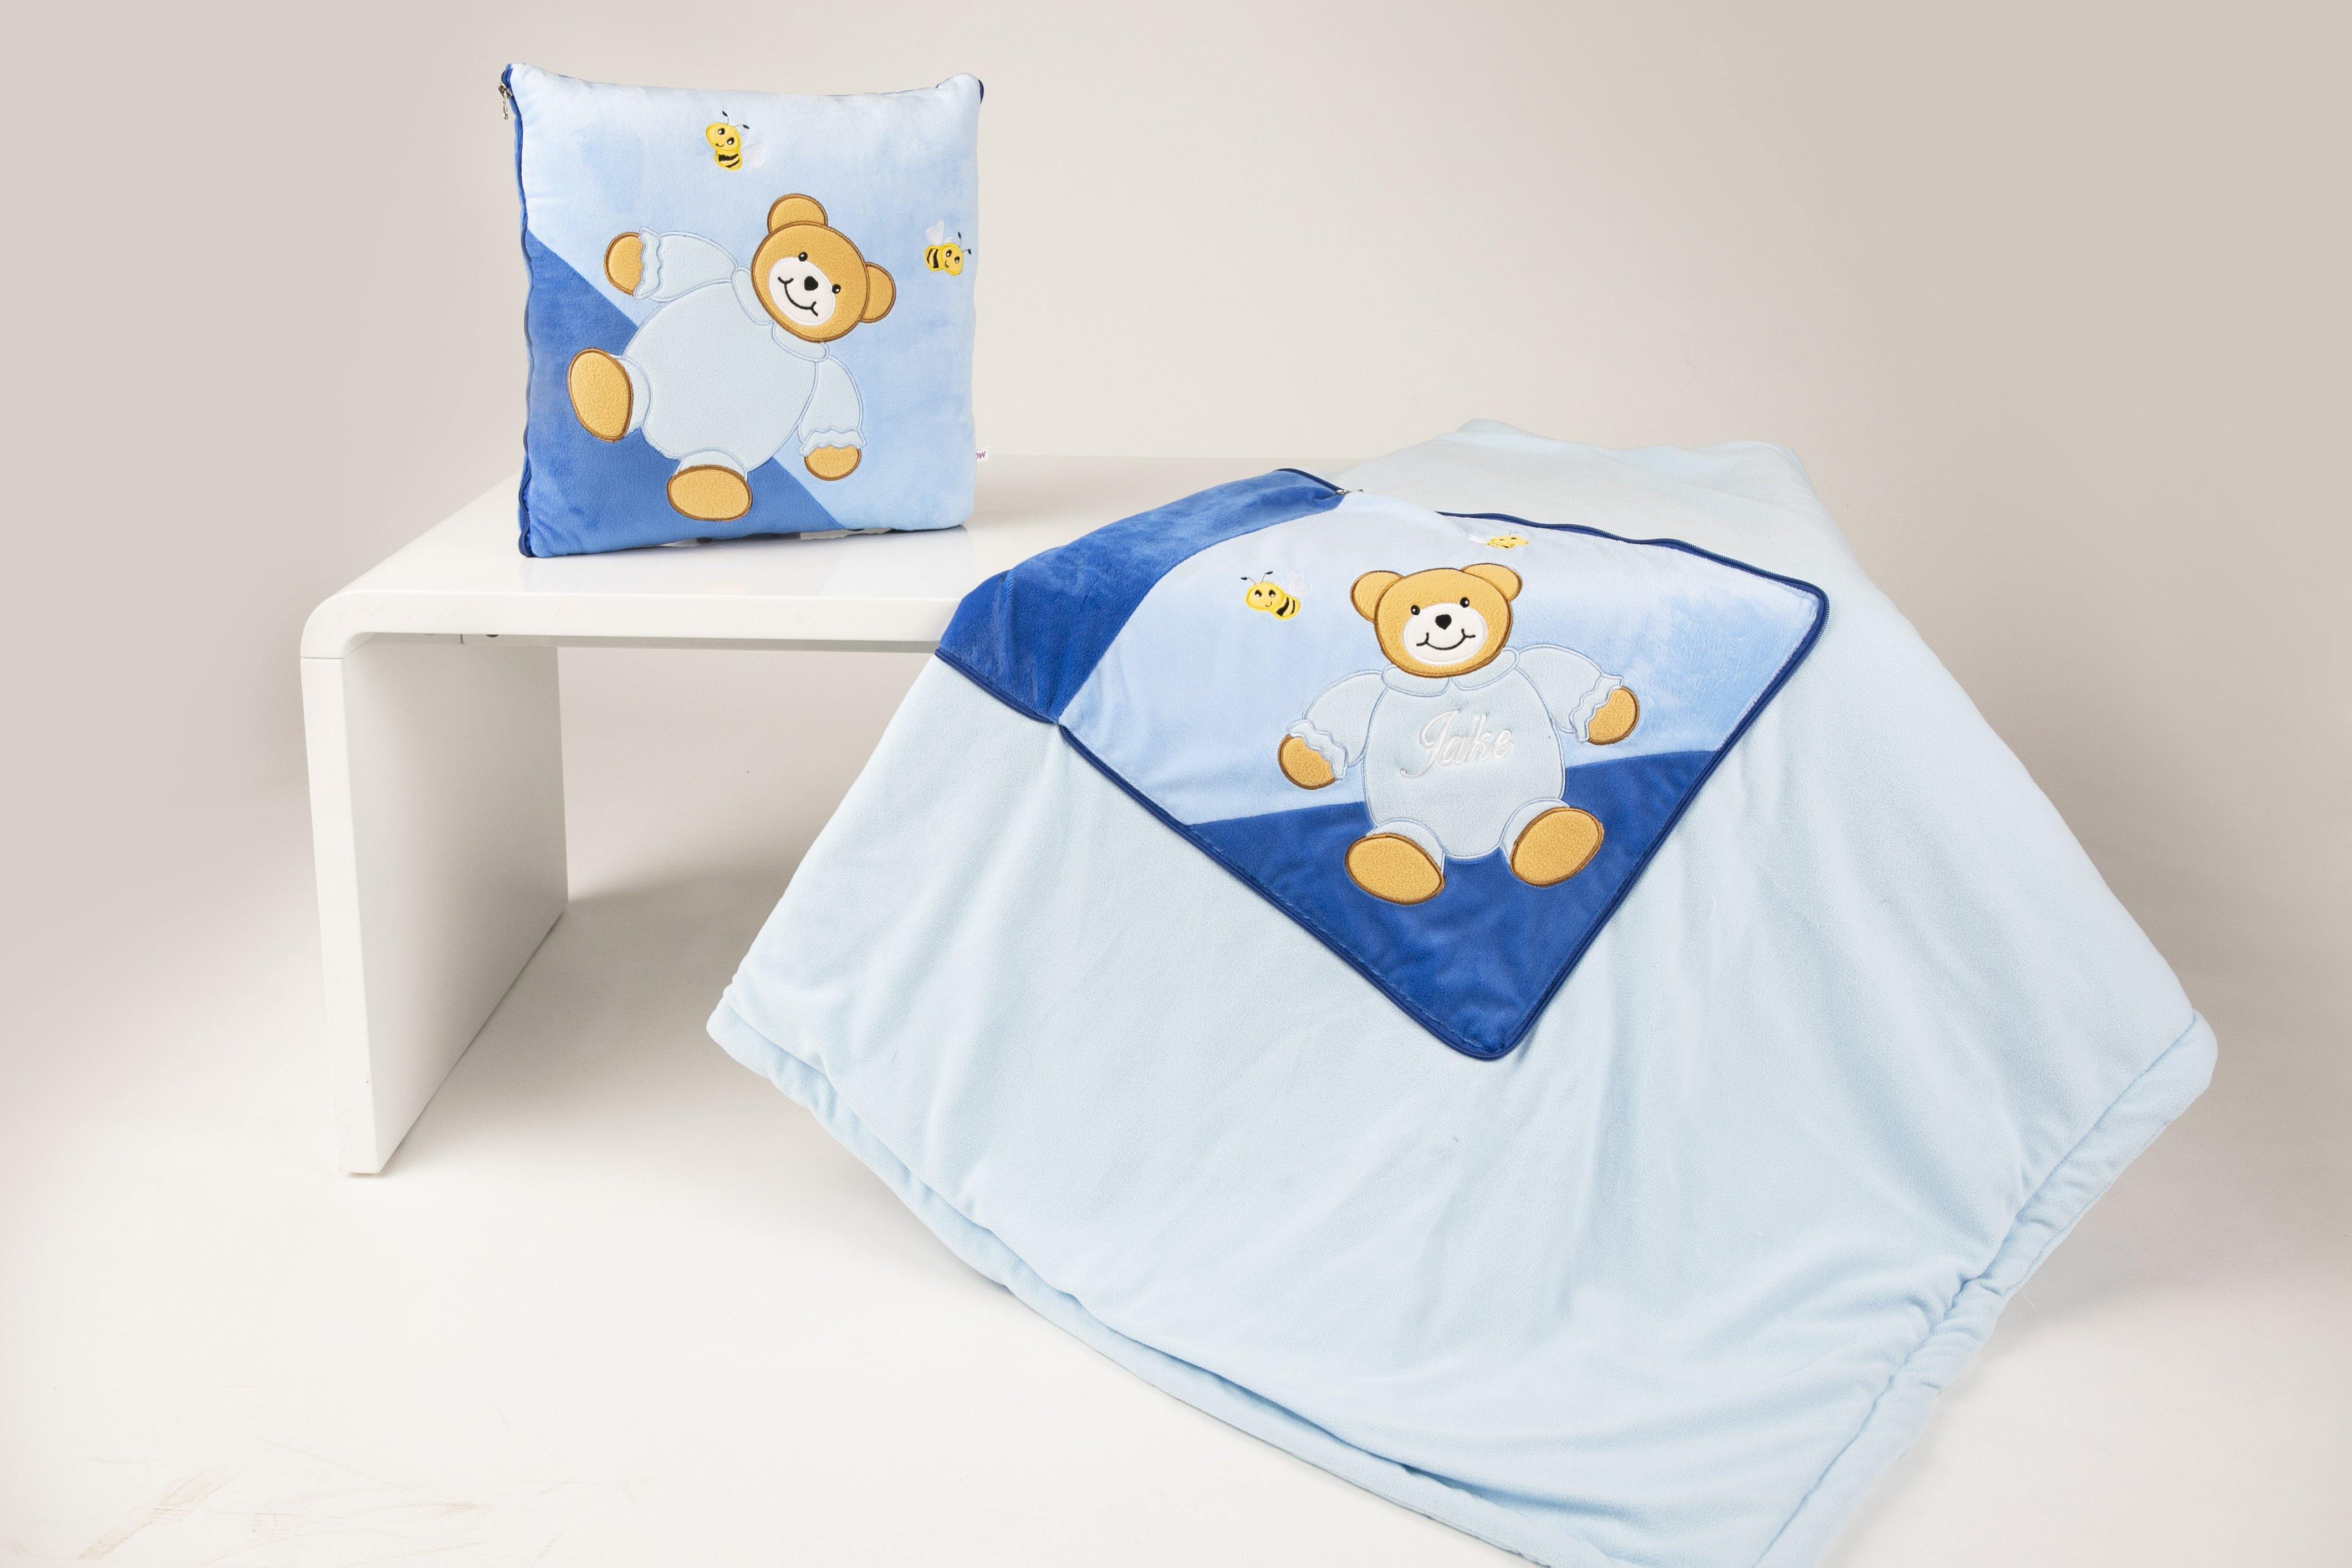 Quillow - Pillow -Boys Cot Blanket Personalised. - Robes 4 You